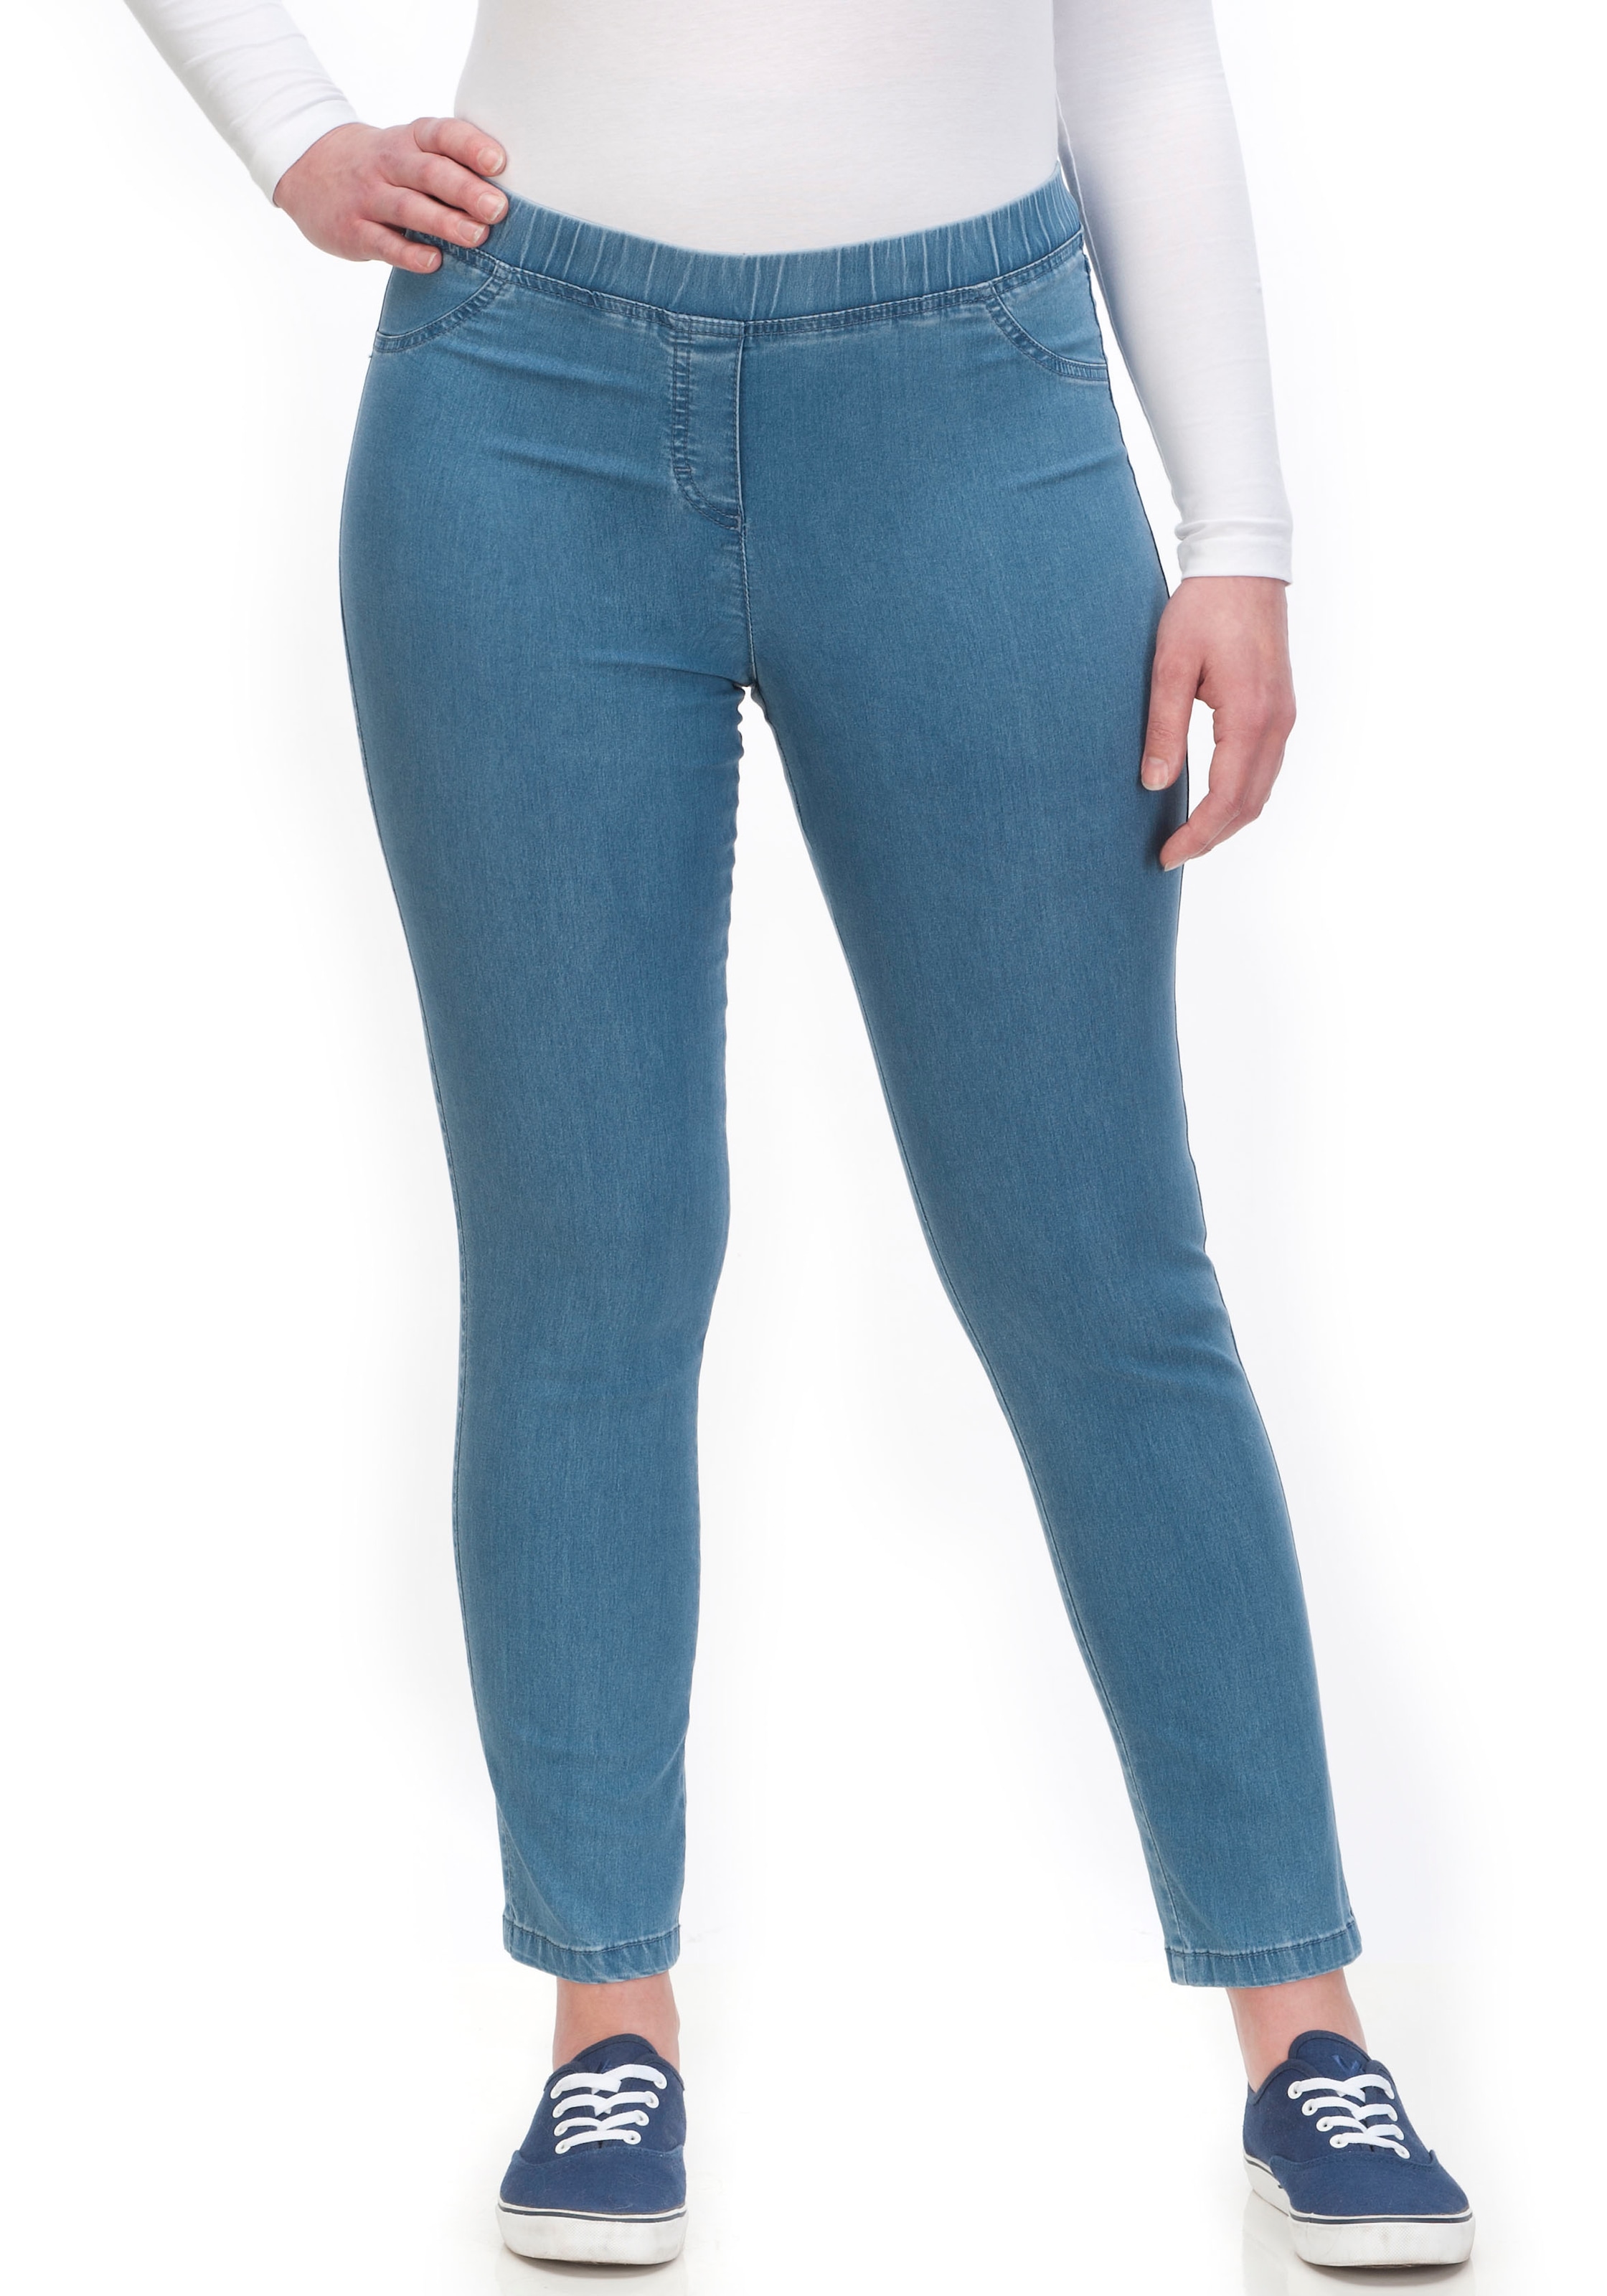 KjBRAND Jeansjeggings »JENNY«, angenehm weiche Quer-Stretch Qualiät im OTTO  Online Shop | Stretchjeans